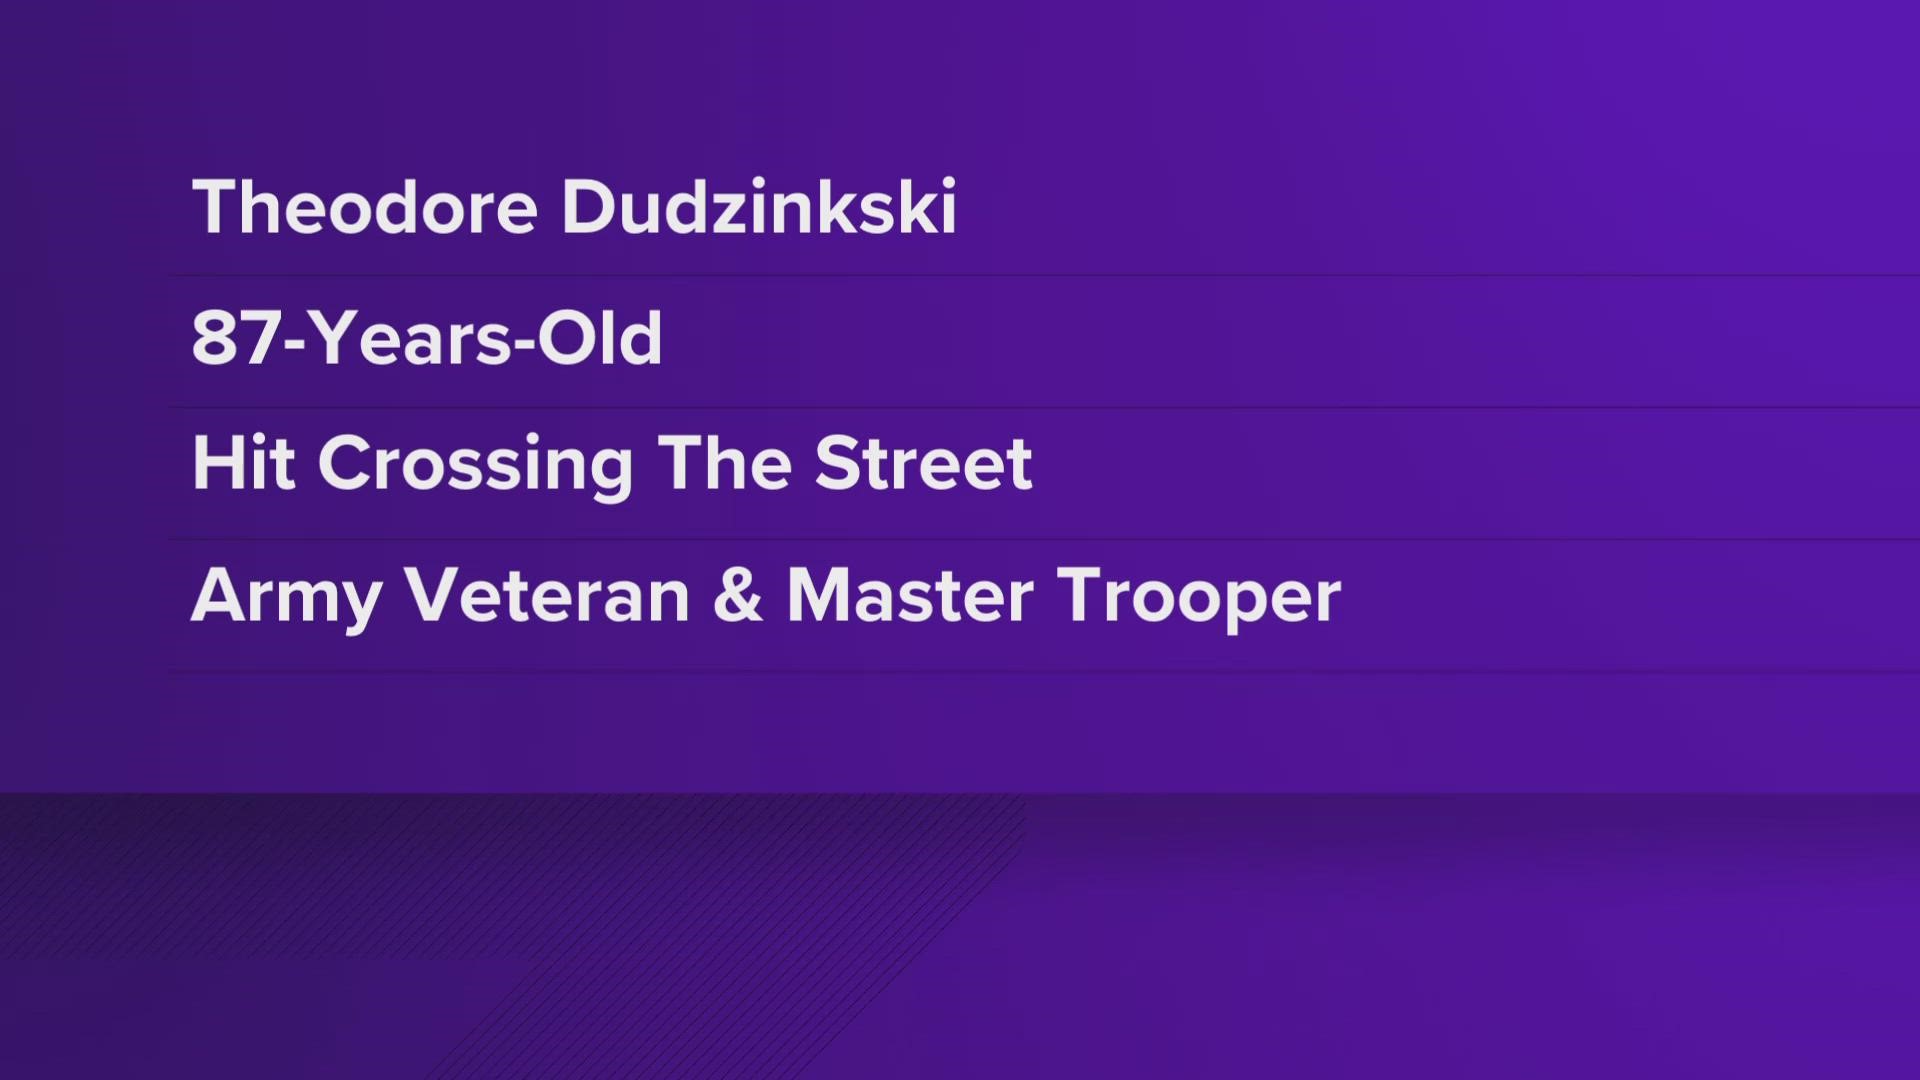 Theodore Dudzinski was a U.S. Army veteran and a master trooper with the Indiana State Police for nearly 33 years, according to his obituary.